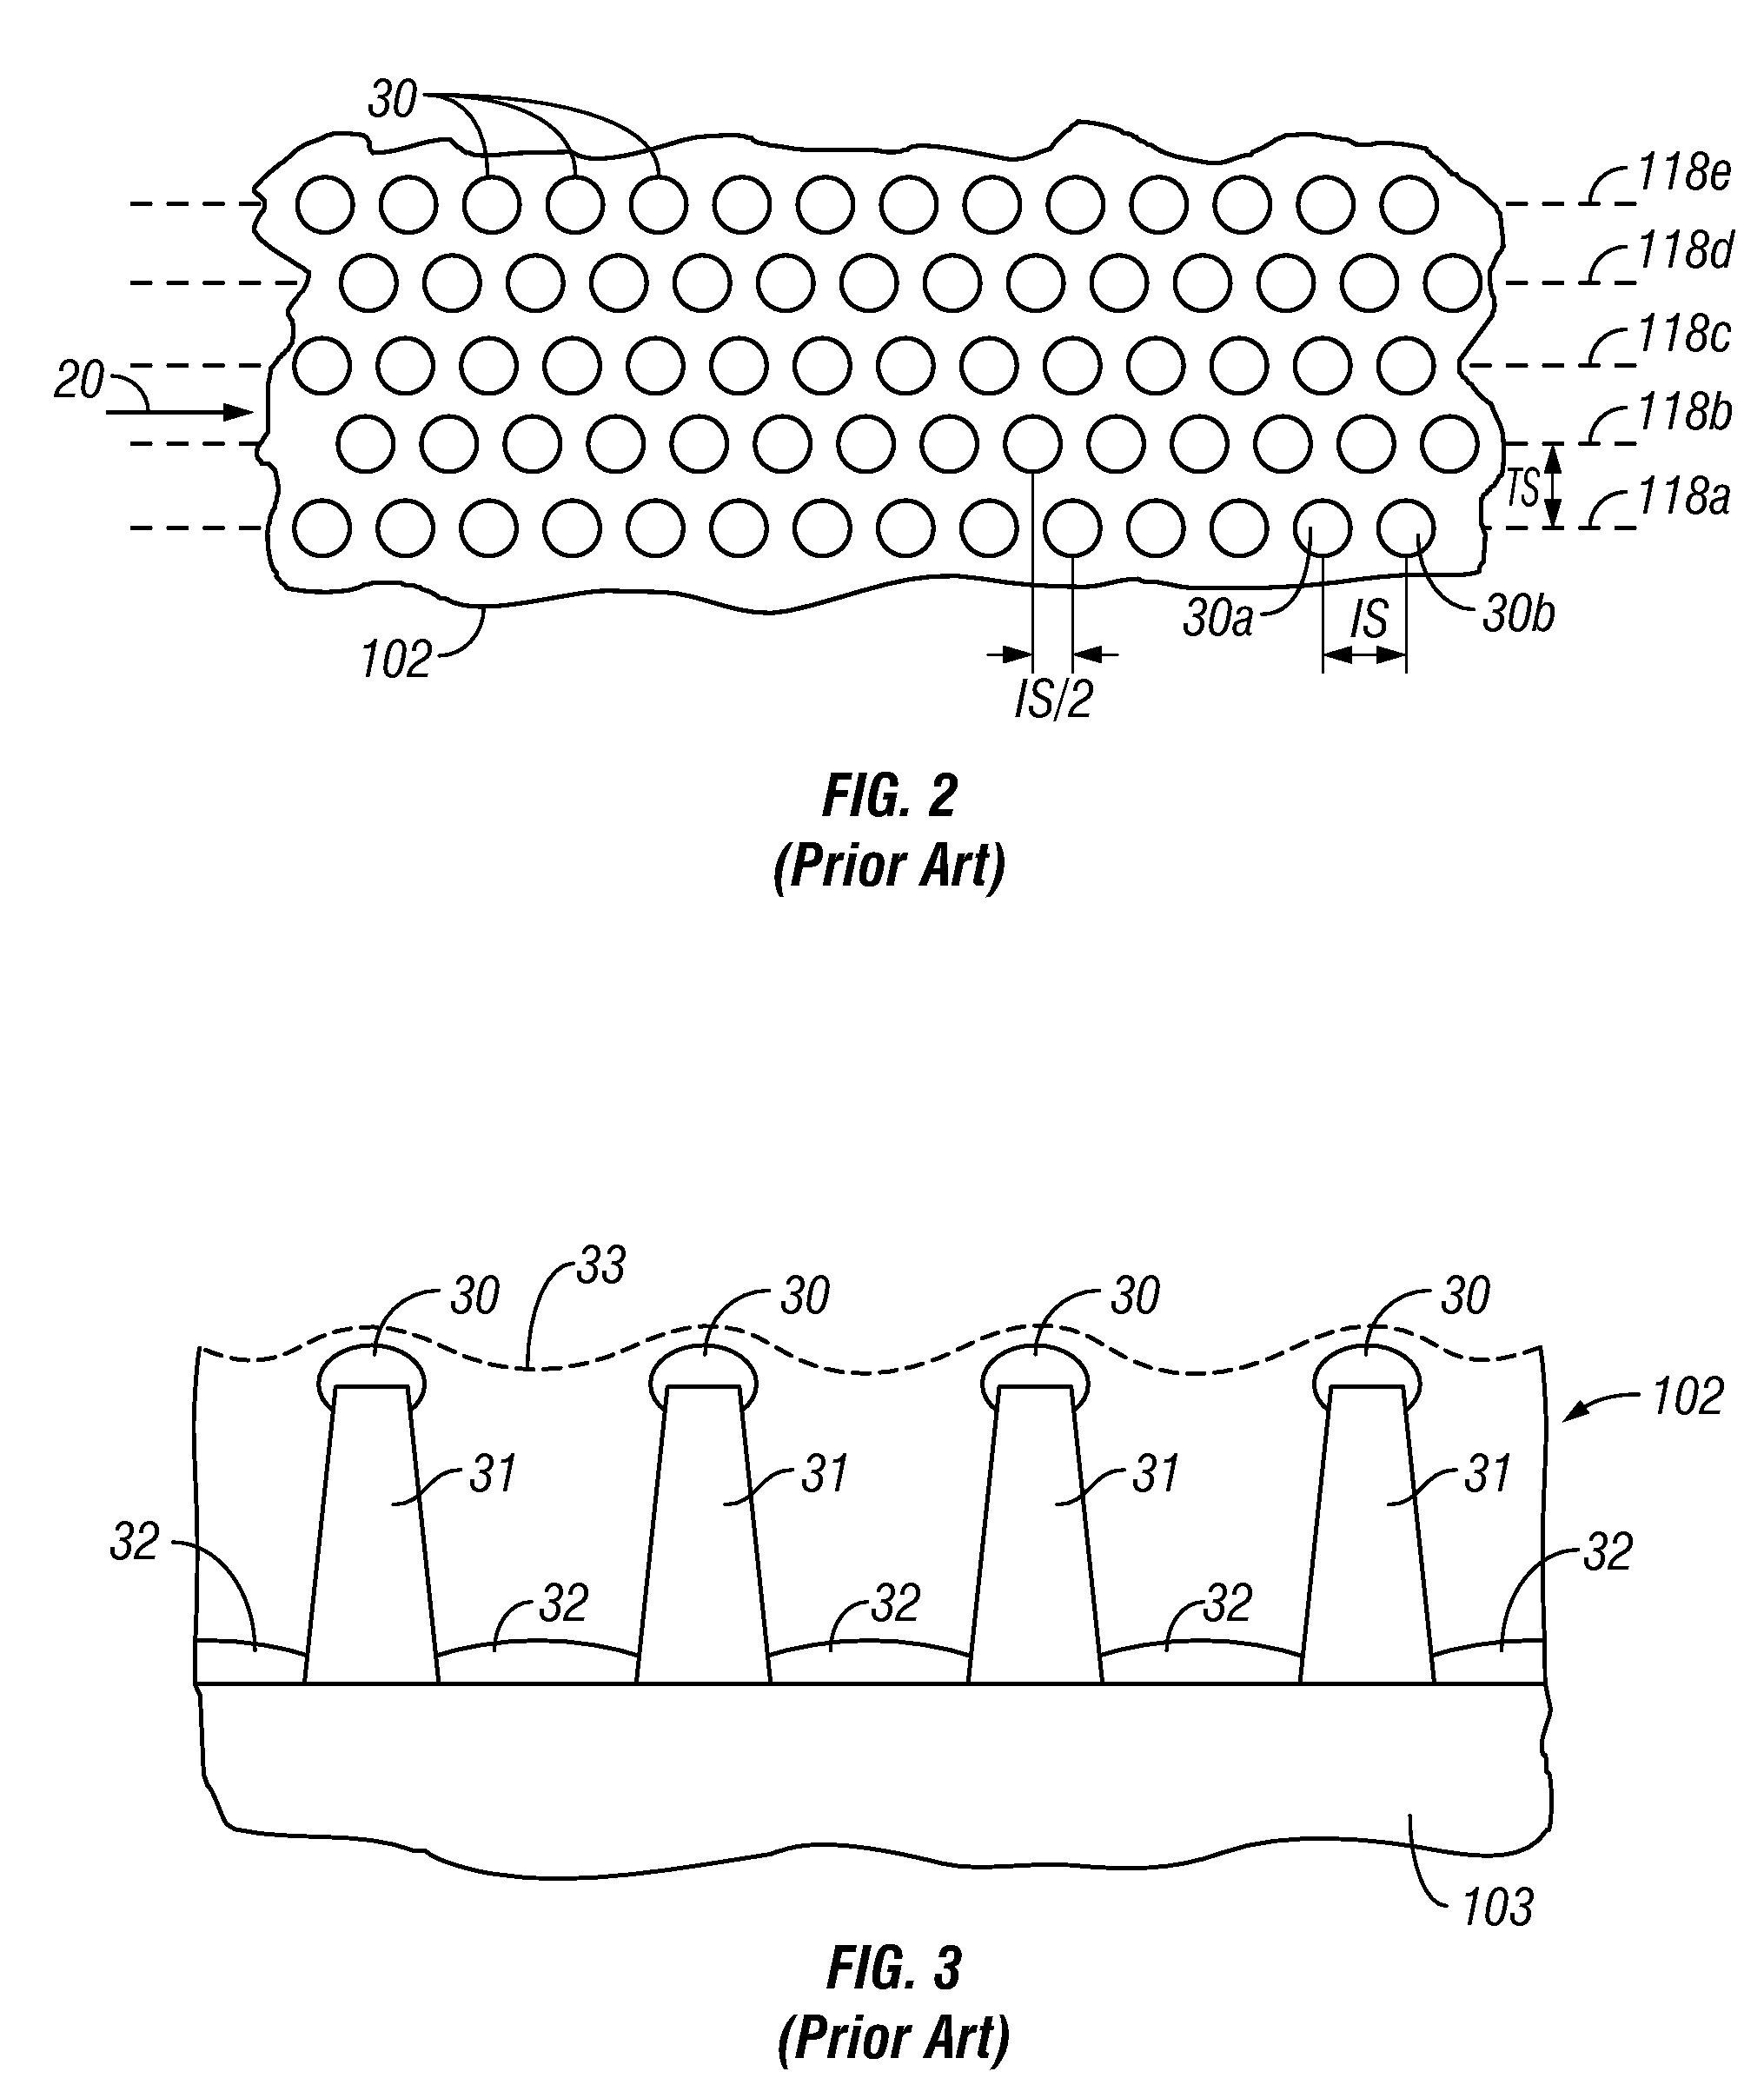 Patterned-media magnetic recording disk with optical contrast enhancement and disk drive using optical contrast for write synchronization